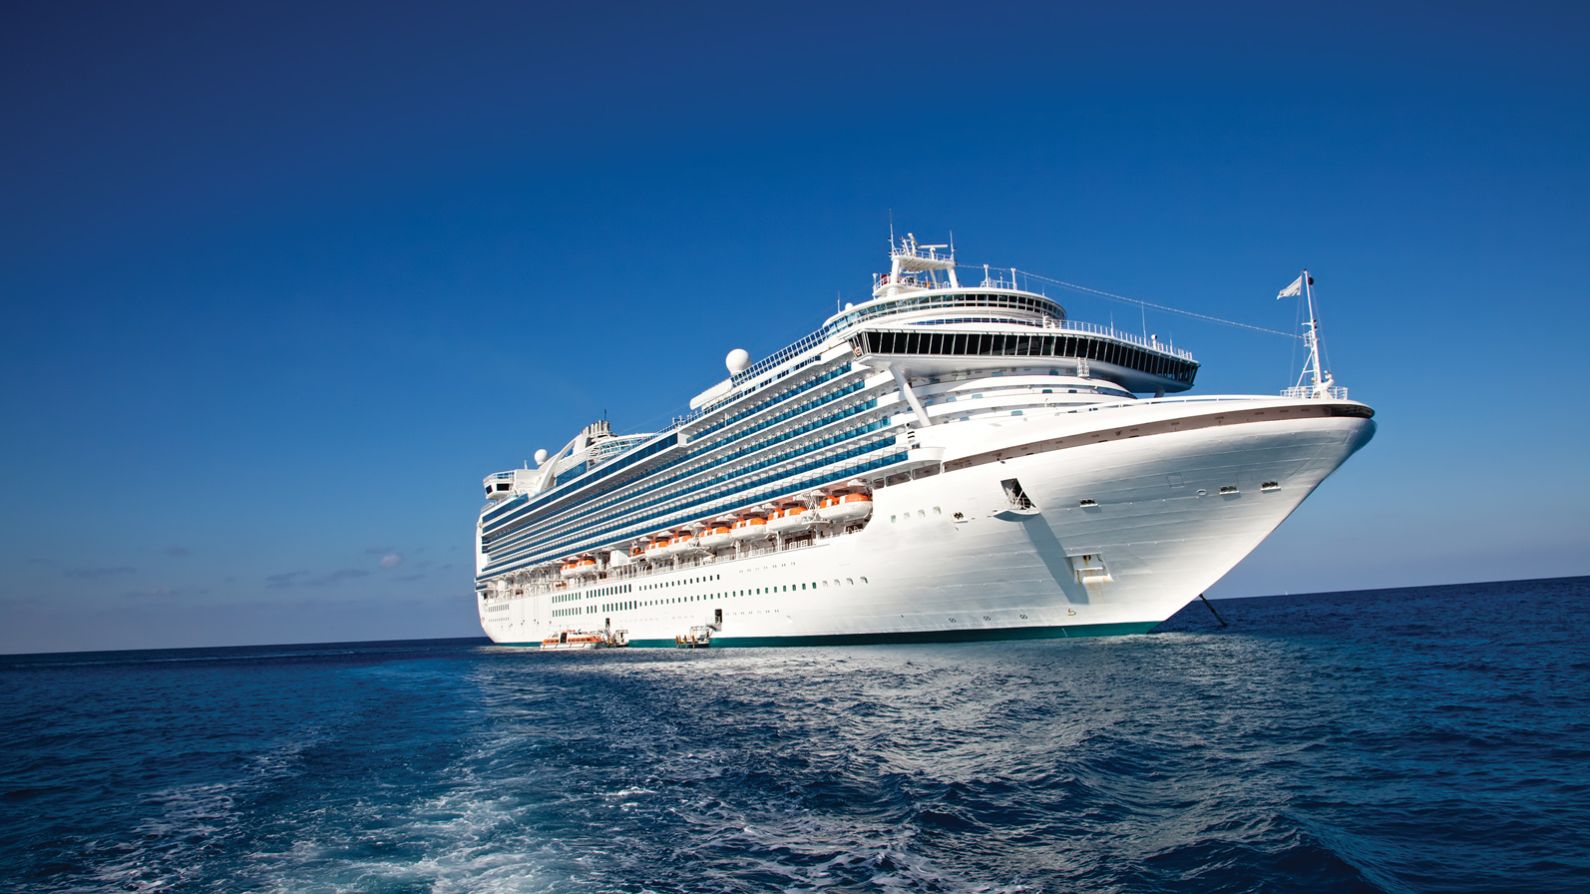 Cruise ships equipped with Nexans cables and solutions